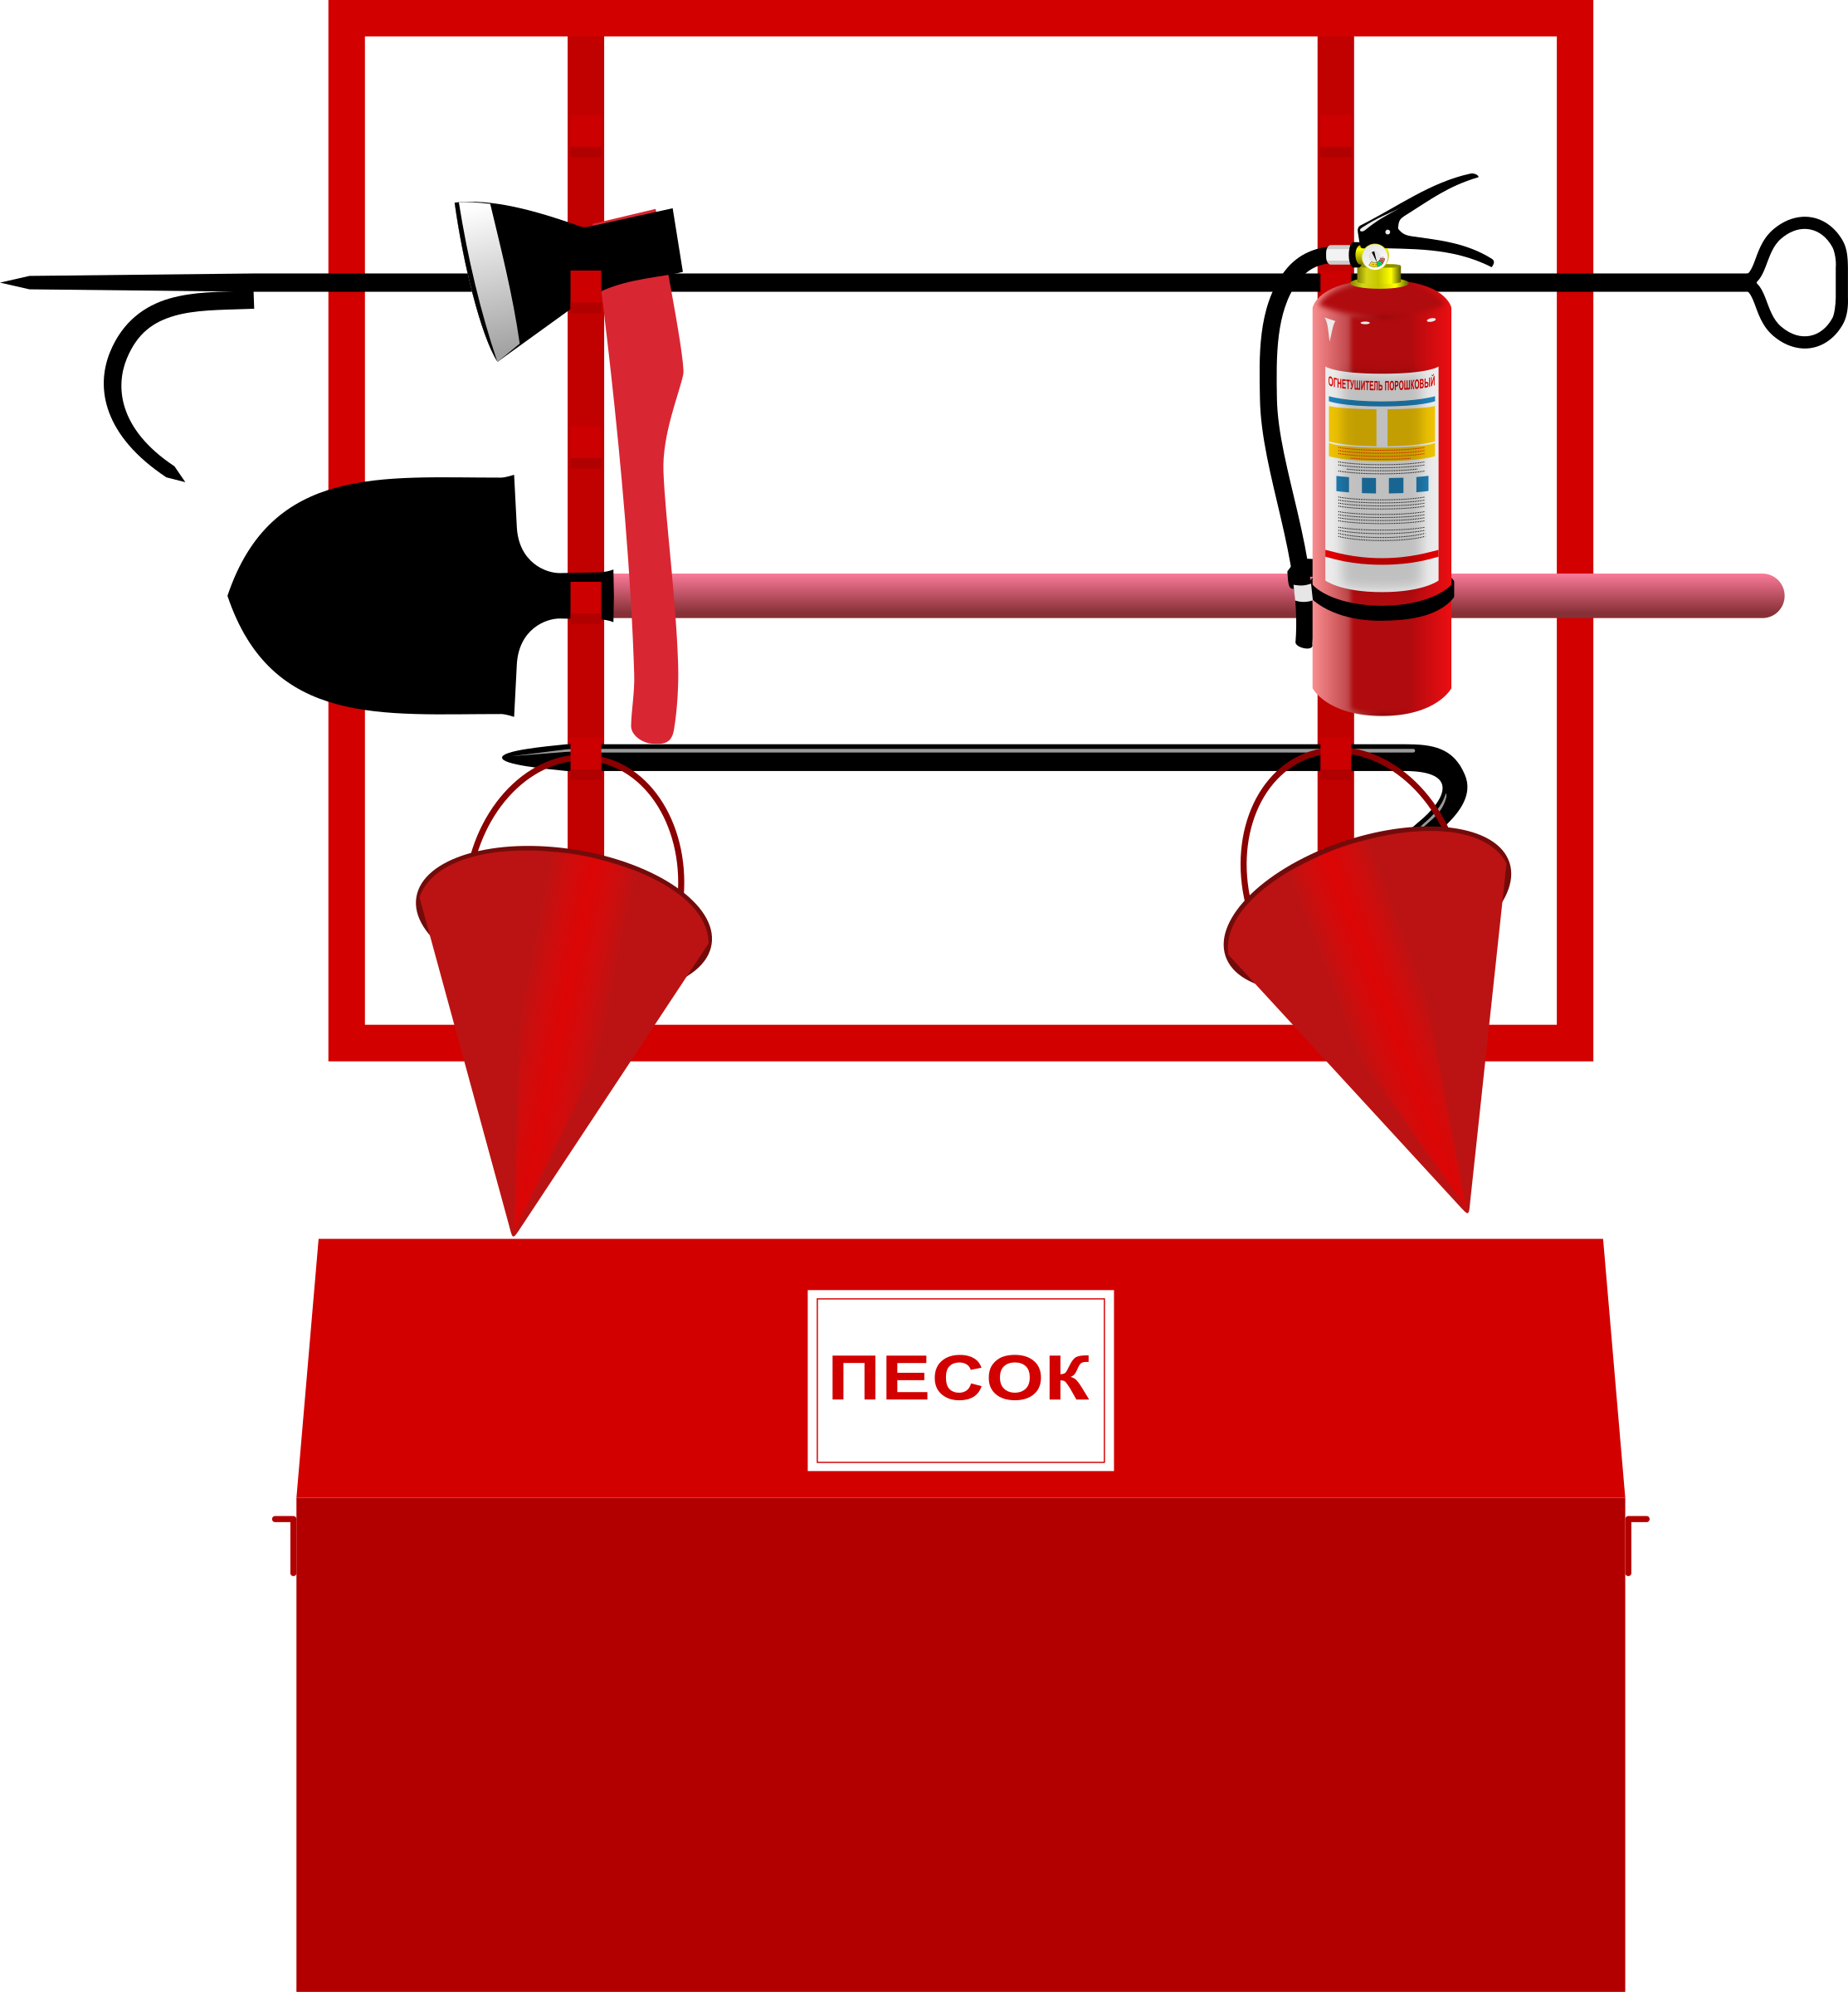 Fire fighting image group. Ruler clipart computer